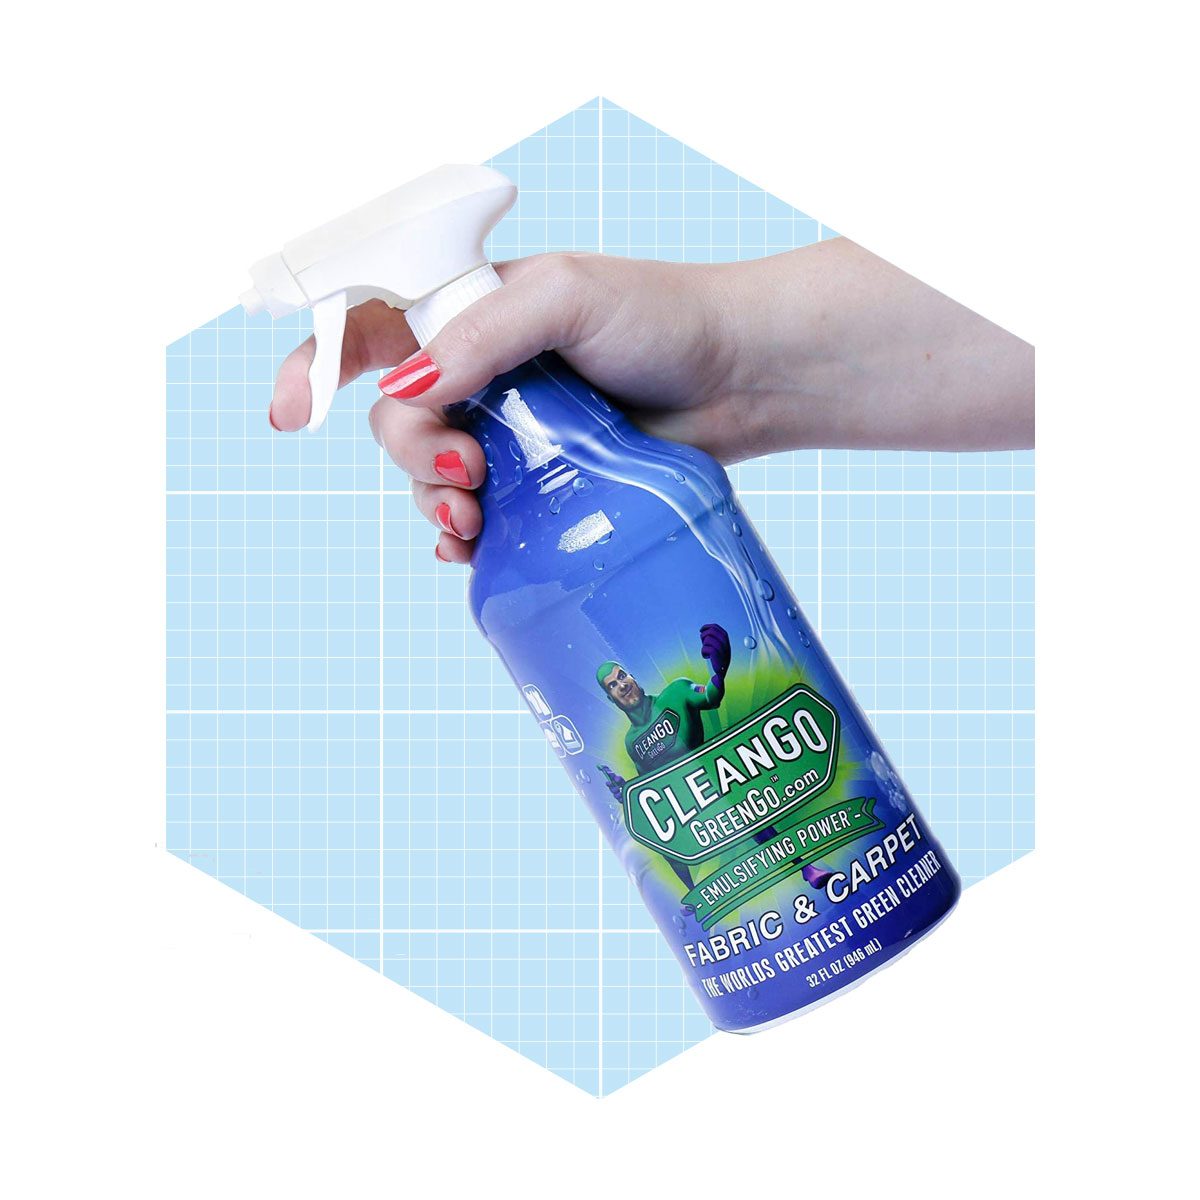 YVY | 3 Naturals Cleaner+1 Refillable Bottles | Household Cleaning Supplies  | All-Purpose Cleaner Spray, Eco Friendly Products, Hypoallergenic